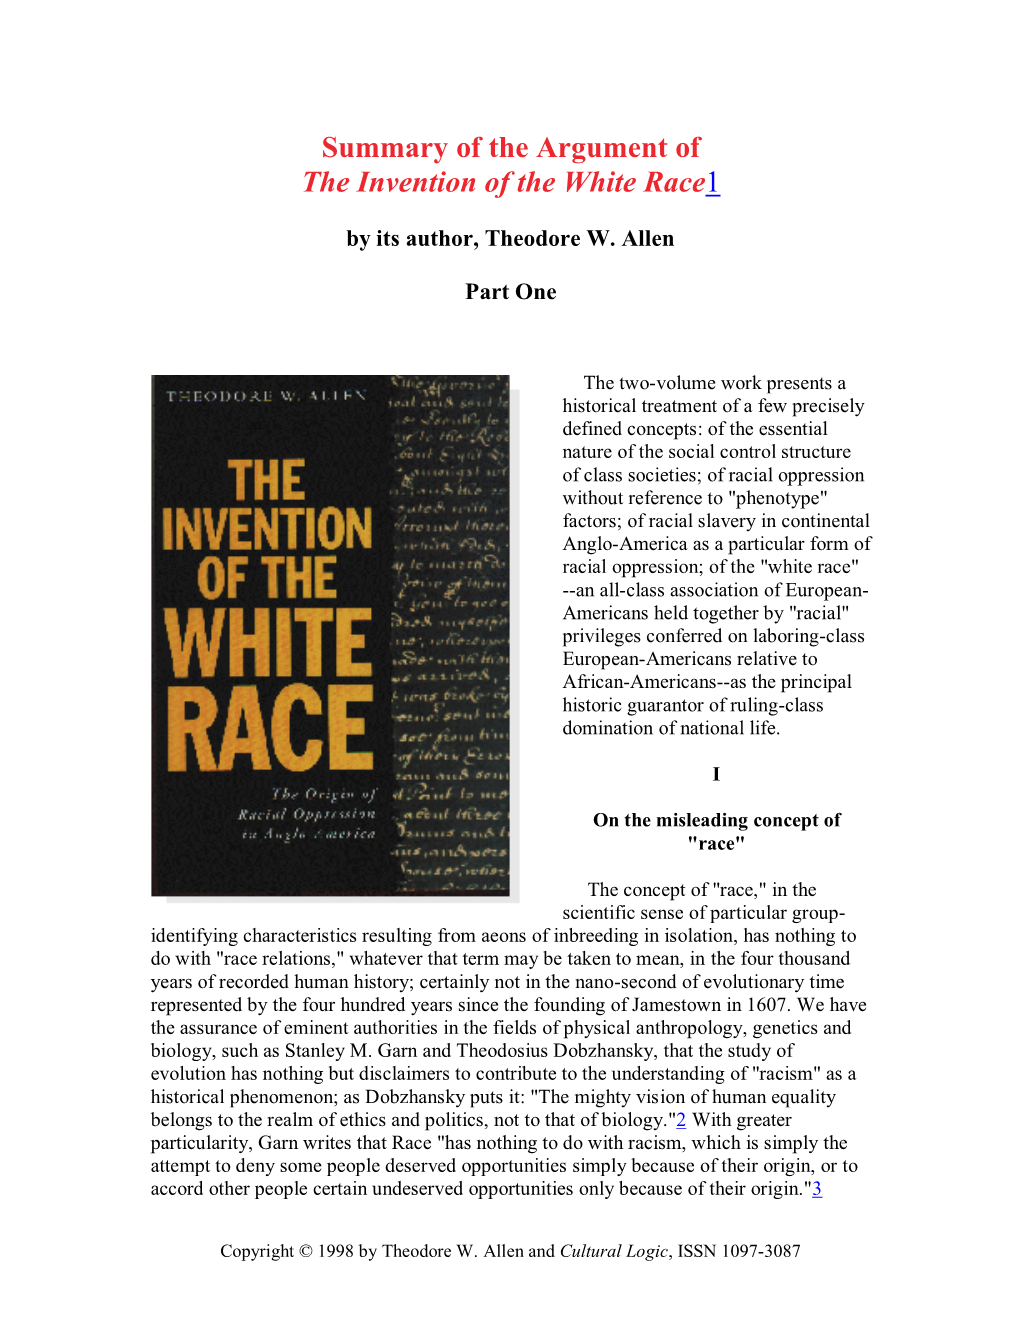 "Summary of the Argument of the Invention of the White Race," Part 1